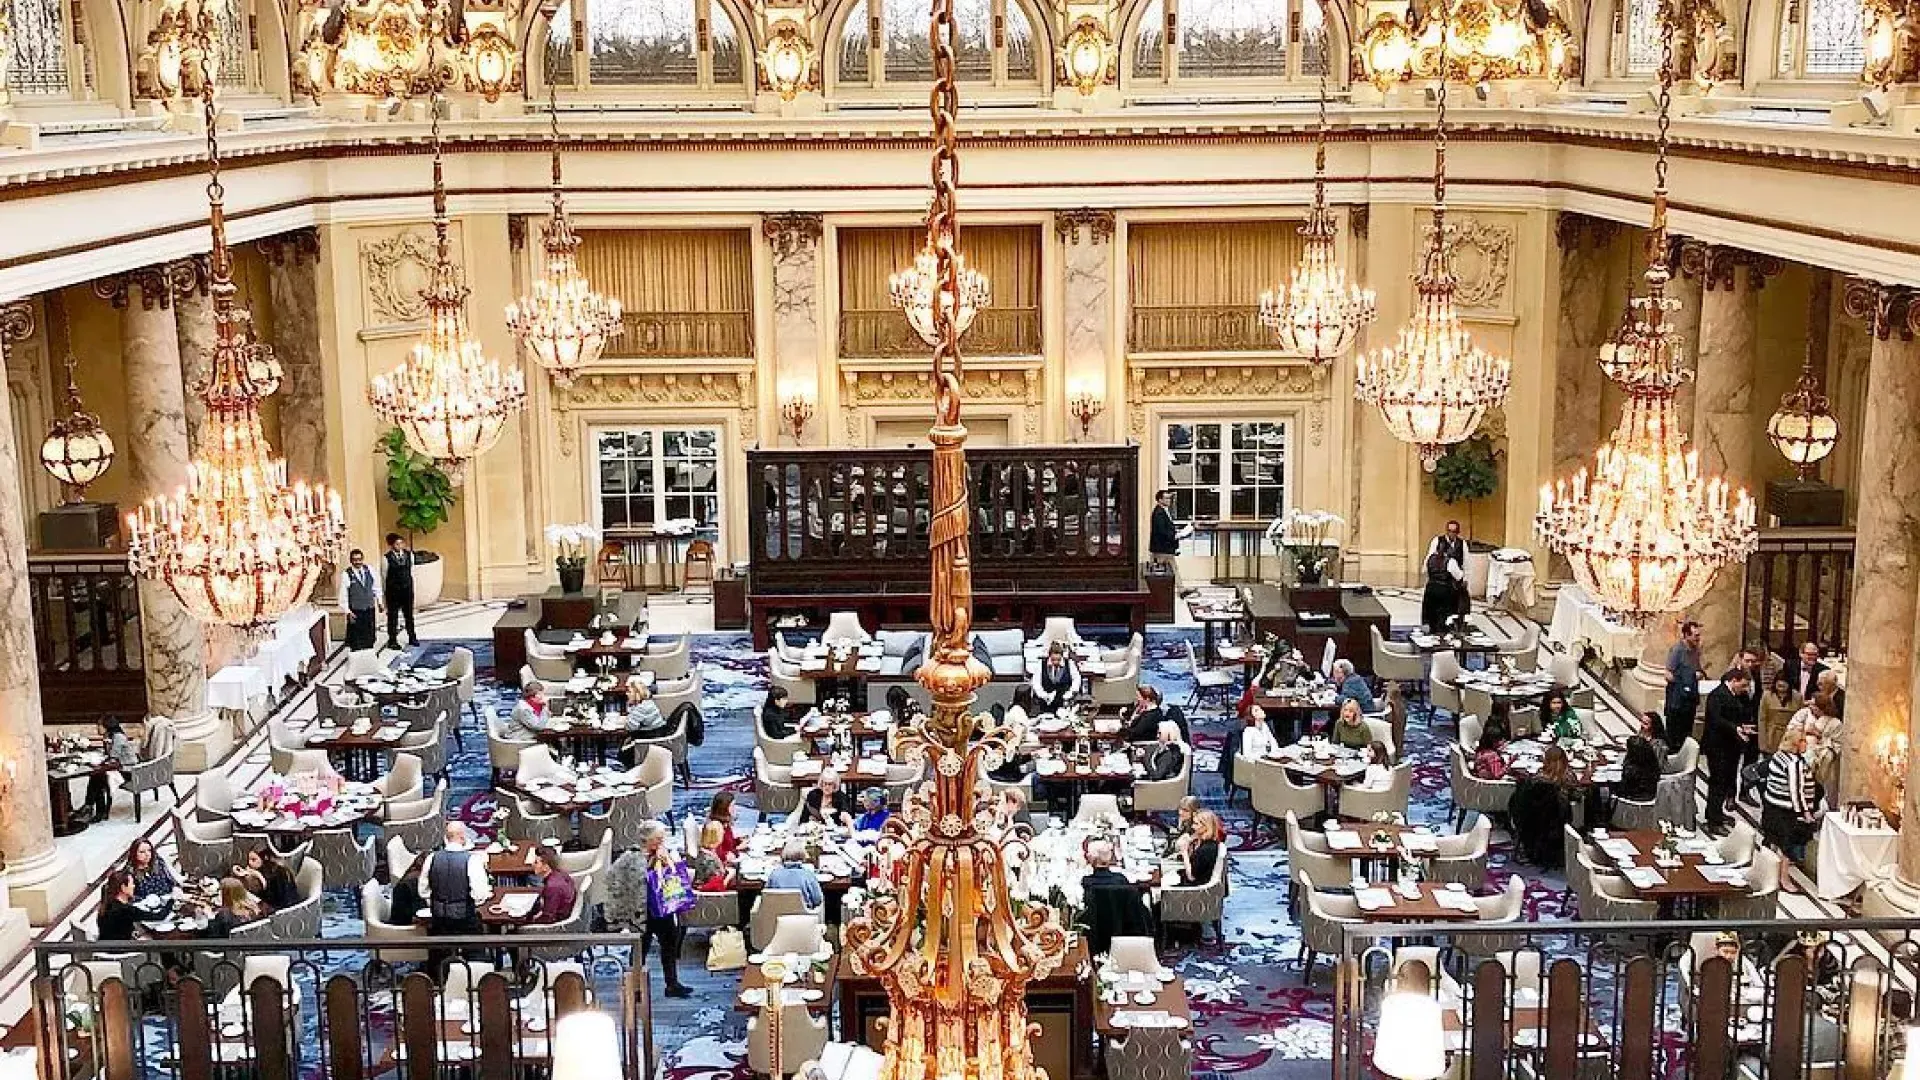 The Garden Court of San Francisco's Palace Hotel